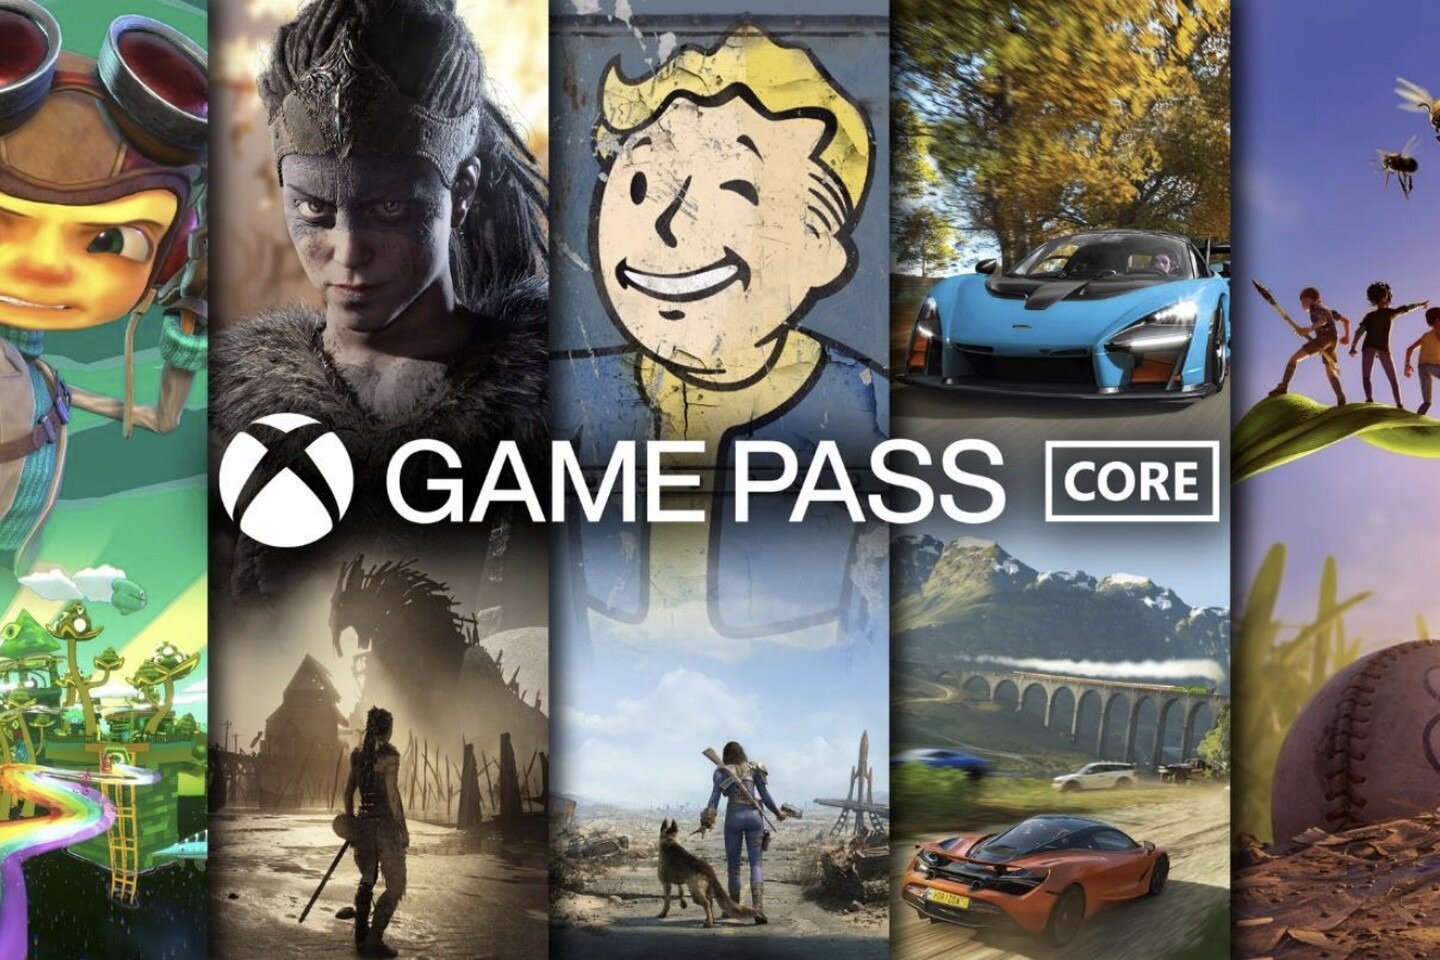 Xbox Game Pass Core replaces Xbox Live Gold on September 14th – Xbox